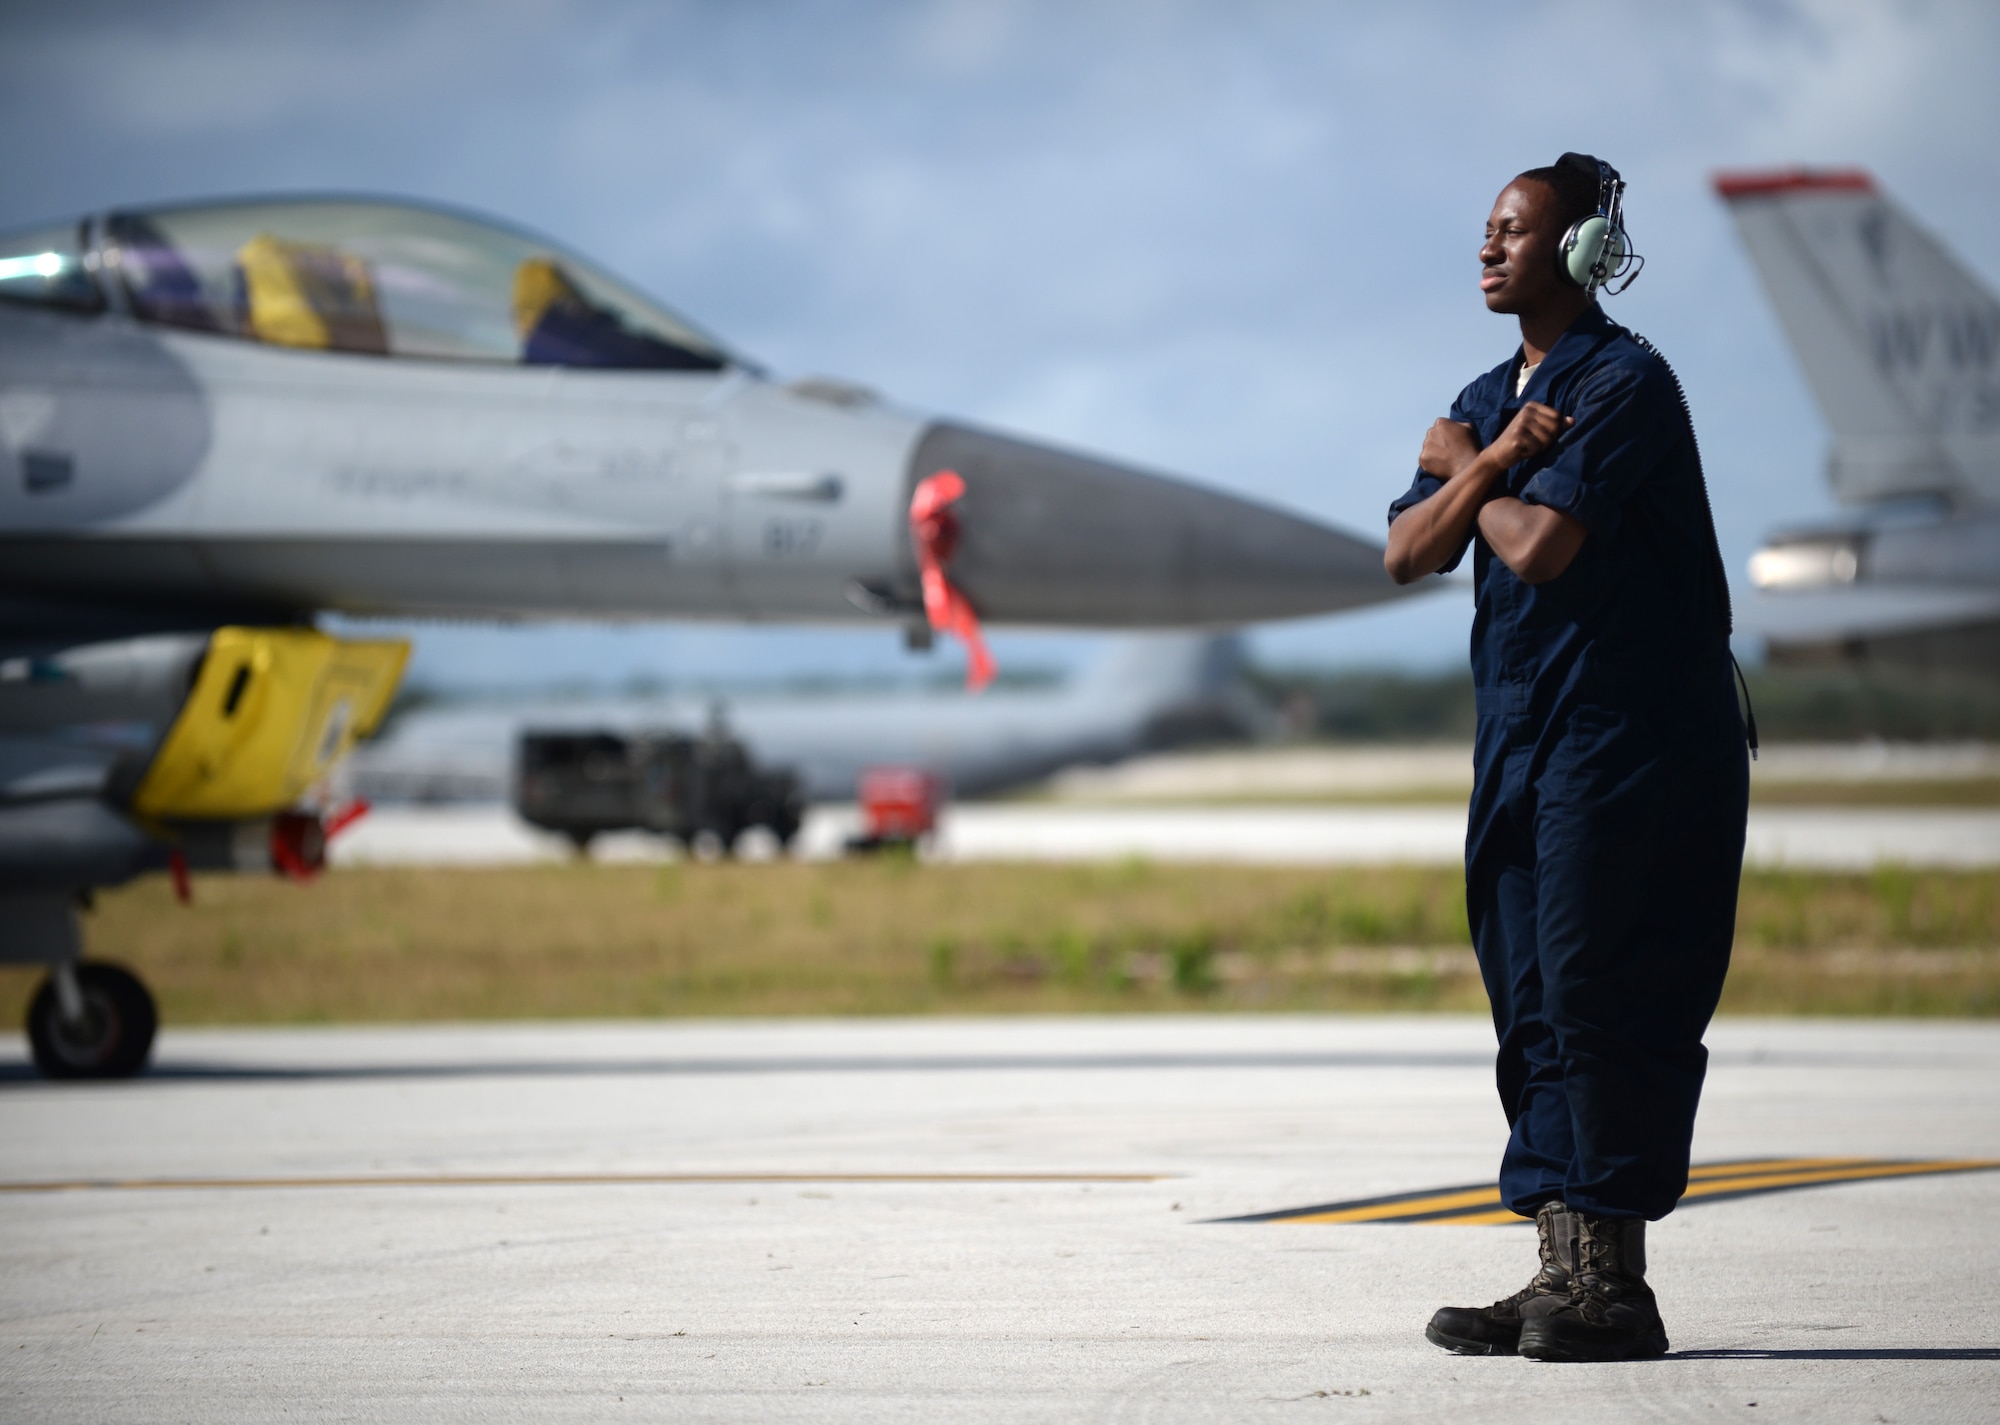 Senior Airman Darion Hubbard, a 35th Aircraft Maintenance Squadron assistant dedicated crew chief from Misawa Air Base, Japan, prepares an F-16 Fighting Falcon for takeoff Feb. 4, 2016, at Andersen Air Force Base, Guam. Several F-16s from the 13th FS are deployed to Andersen AFB in support of Cope North 2016. Cope North is an annual event that focuses on humanitarian assistance and disaster relief and large force employment in an effort to enhance interoperability among forces from the U.S., Japan, Australia, South Korea, Philippines and New Zealand. (U.S. Air Force photo/Senior Airman Joshua Smoot)